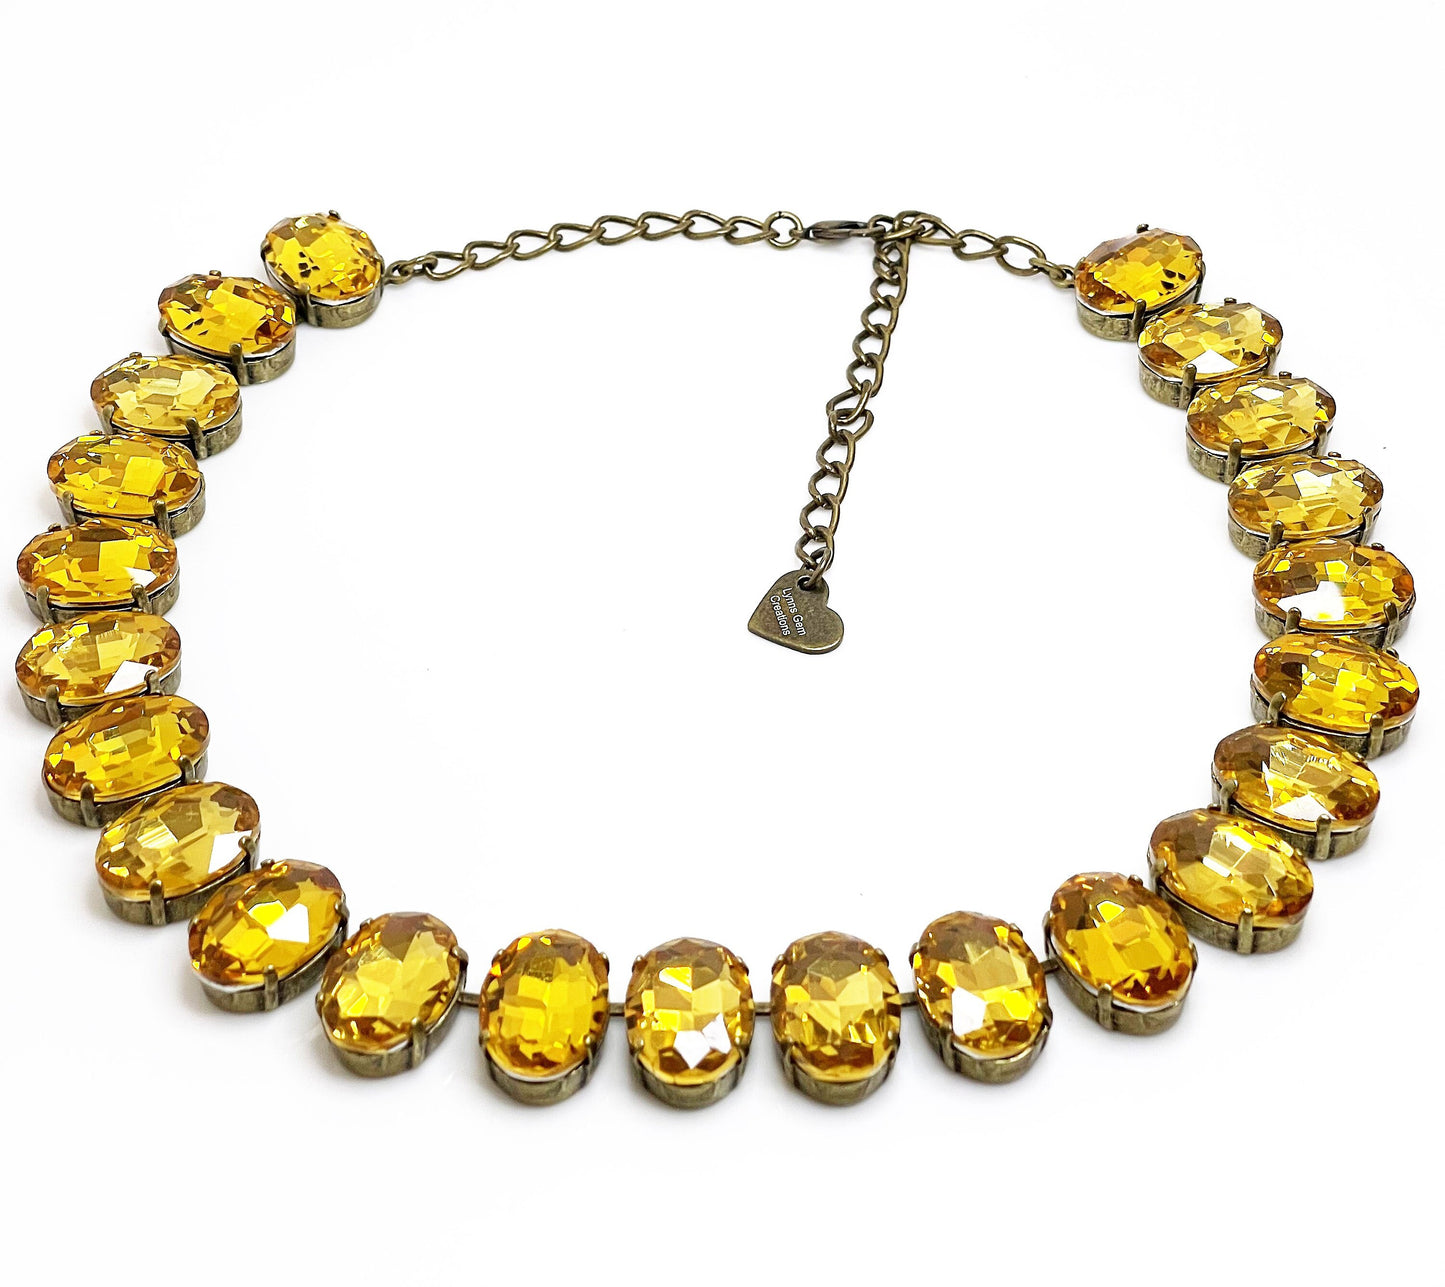 Yellow Crystal Georgian Collet Necklace, Anna Wintour Style, Yellow Crystal Choker, Riviere Necklace, Statement Necklace for Women